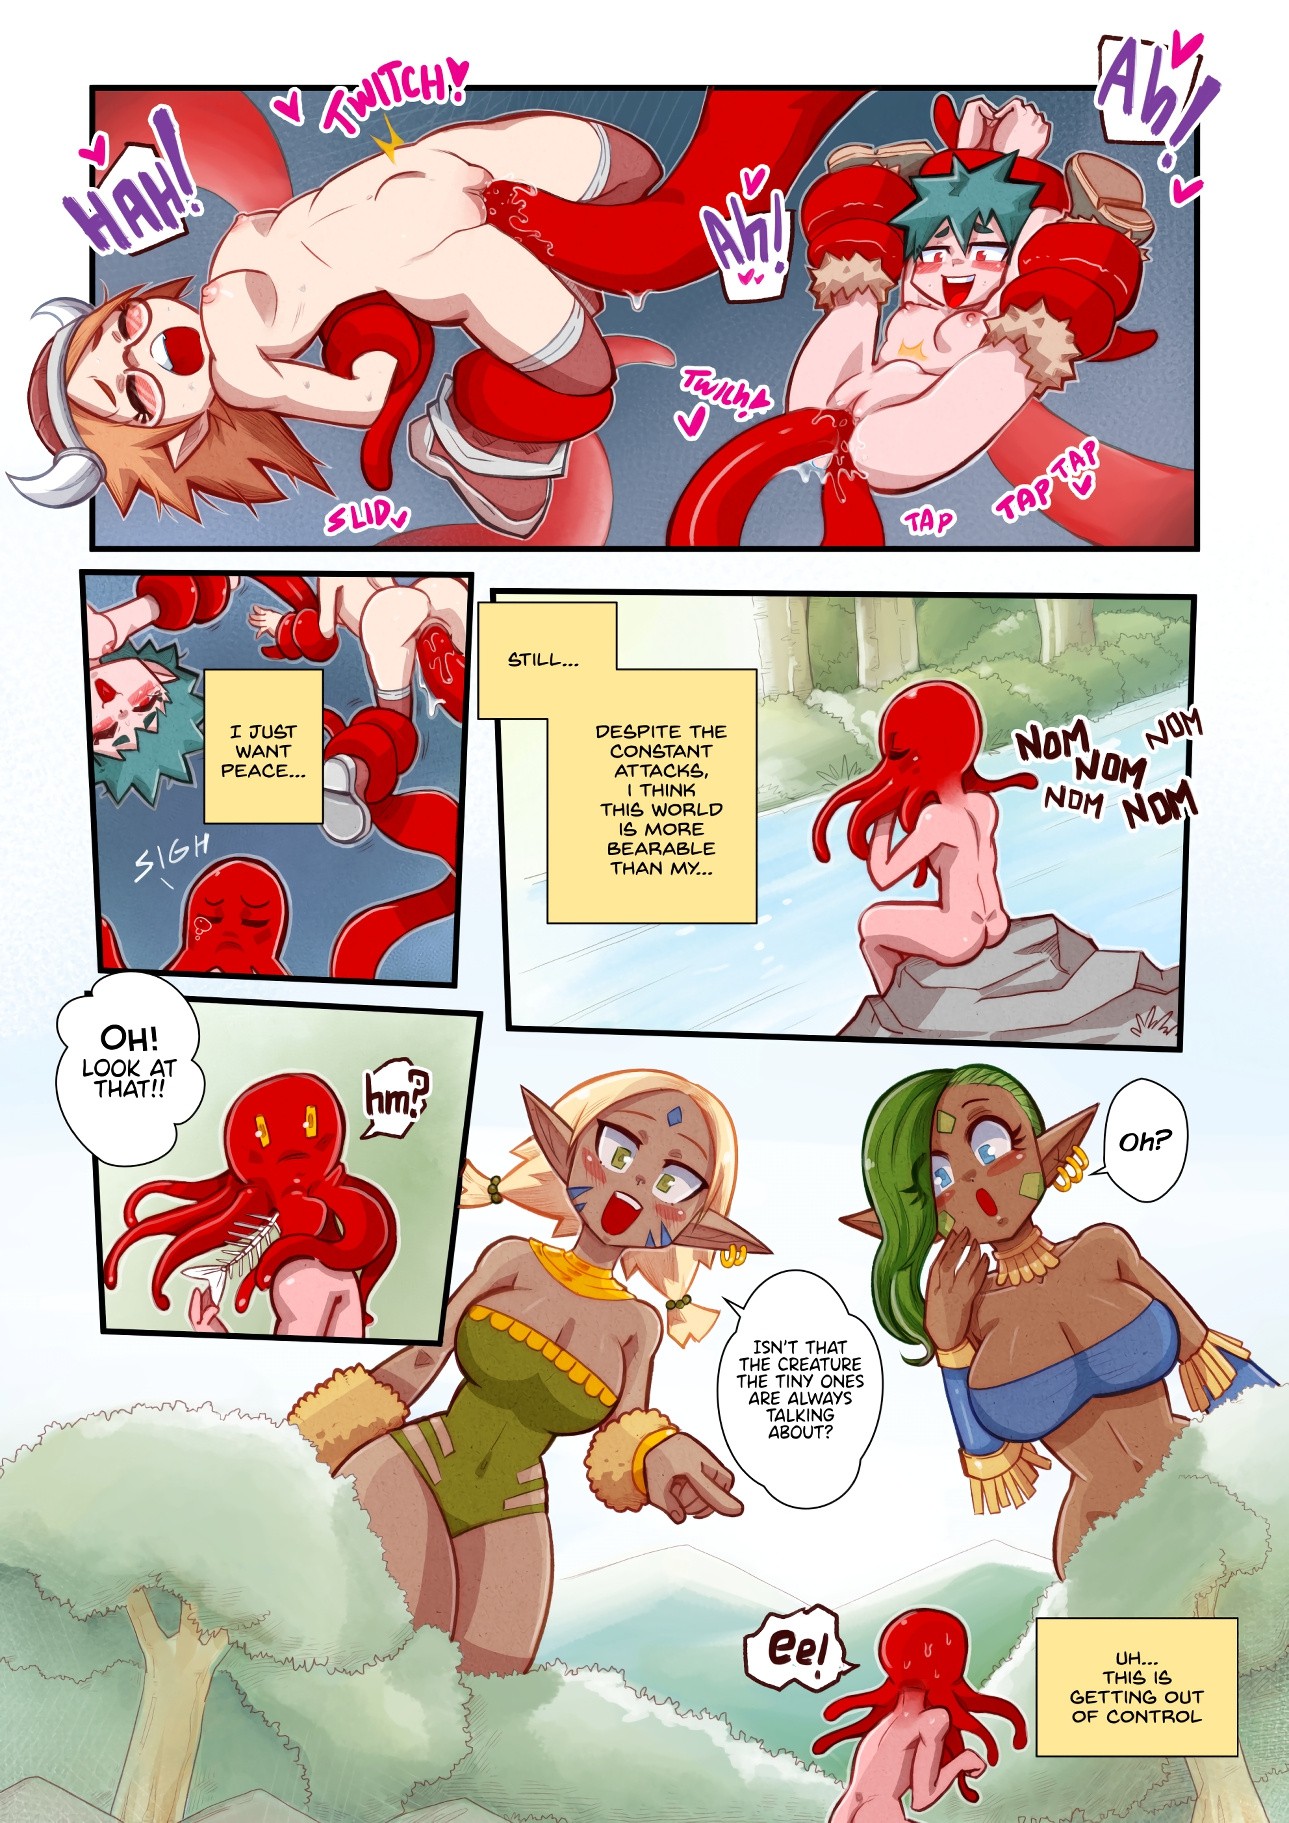 Life as a Tentacle Monster in Another World porn comic picture 11